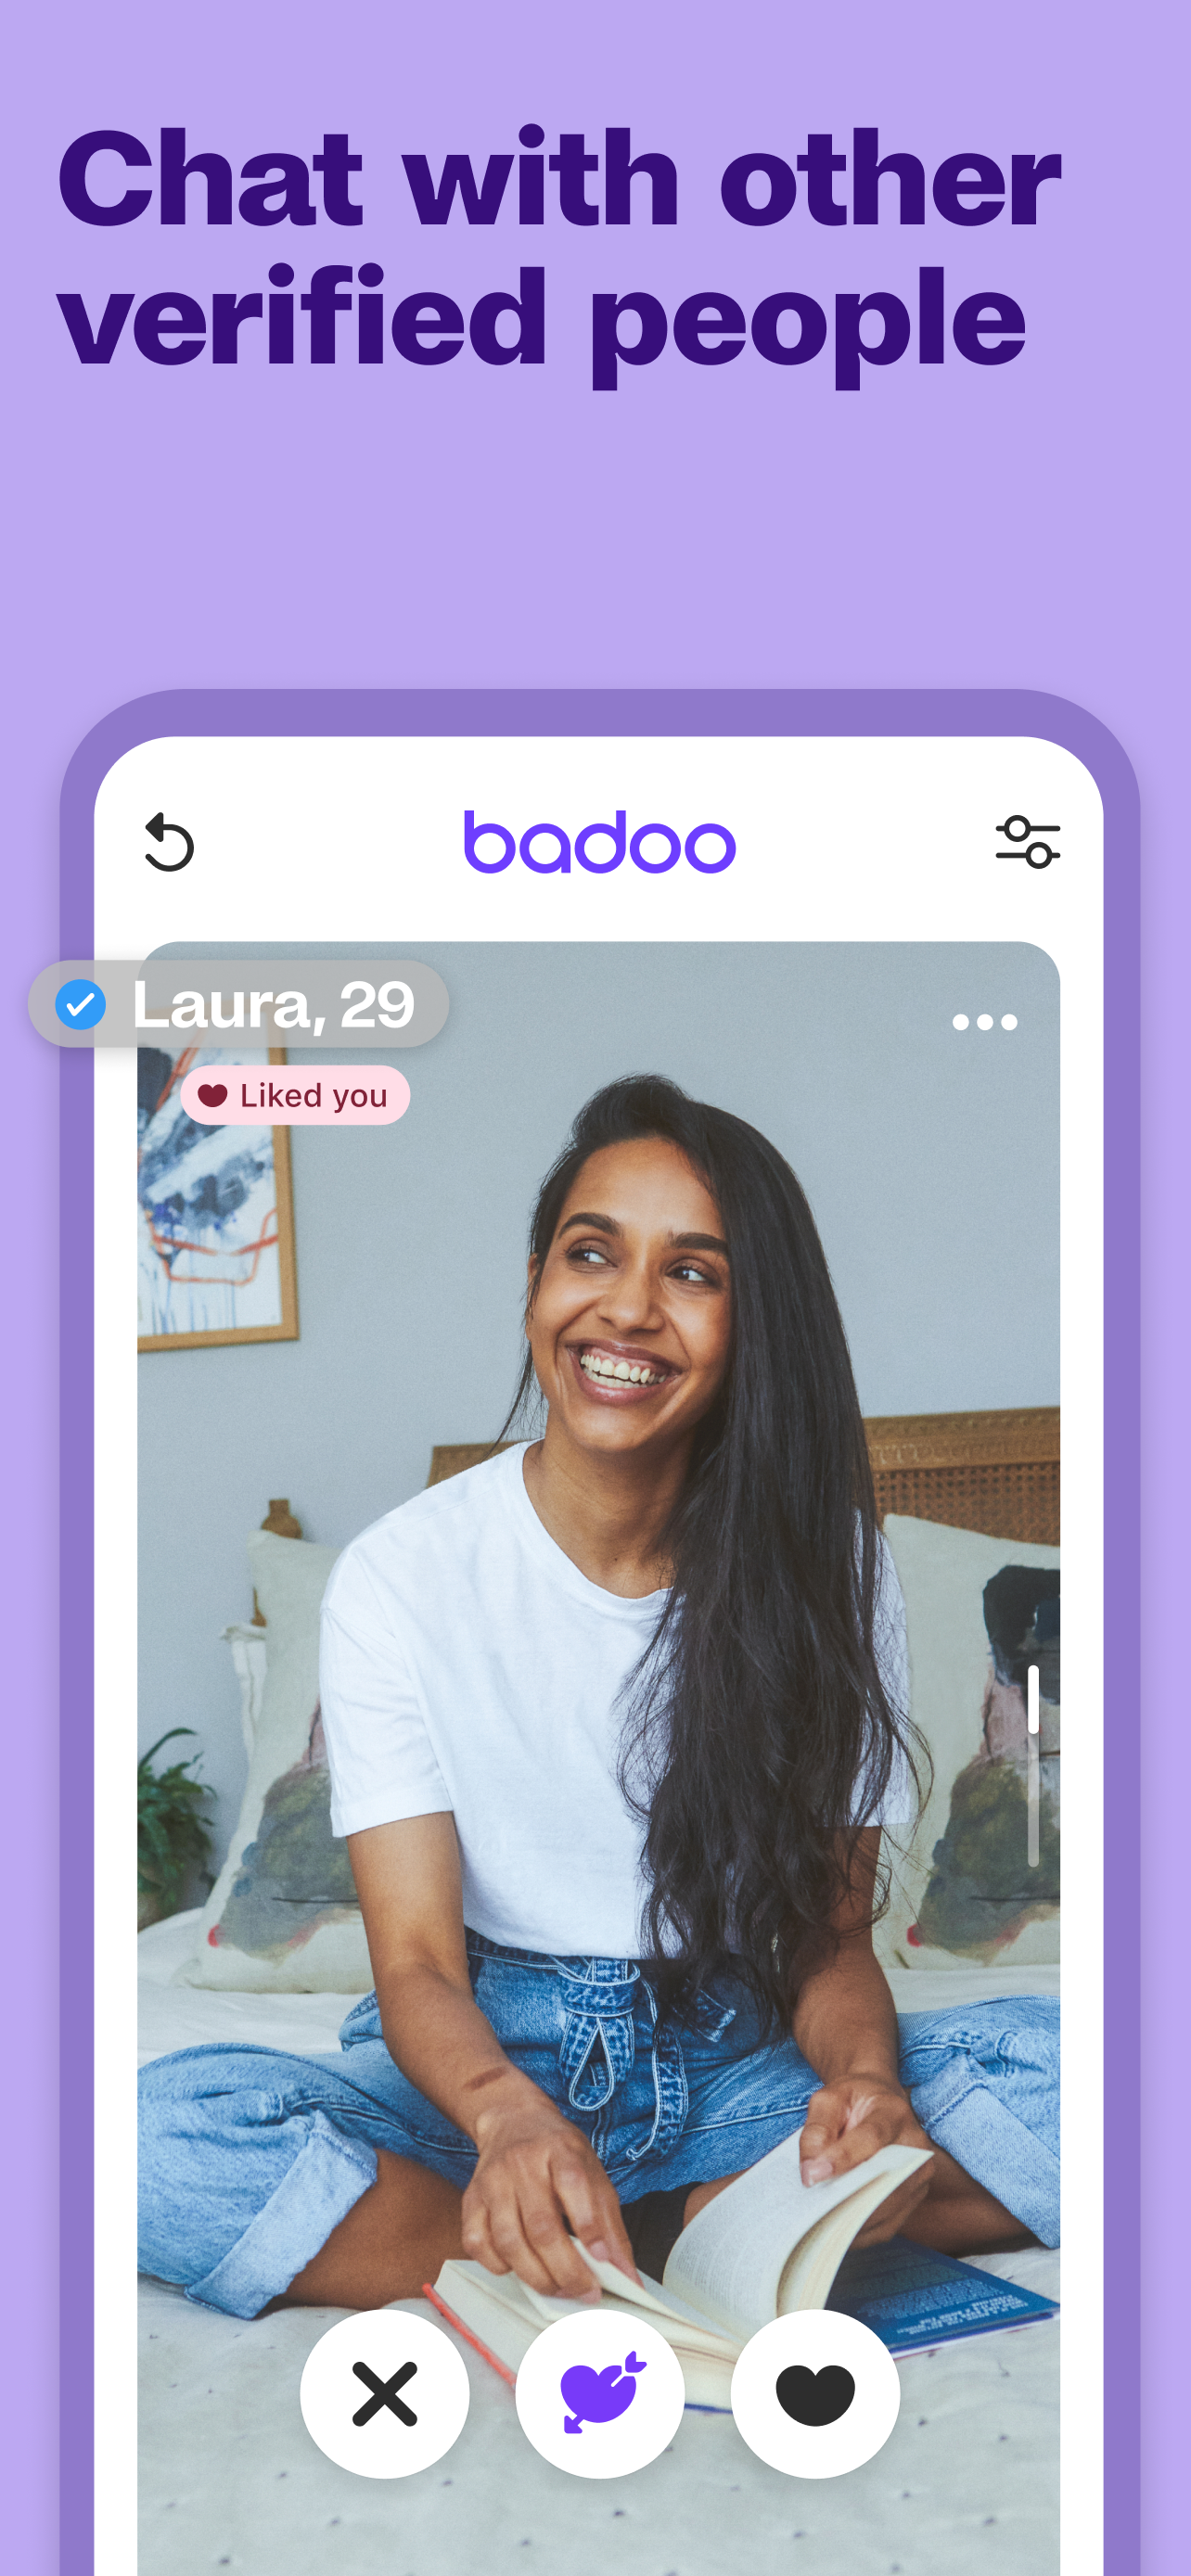 Do you get message on badoo from.screenshotting